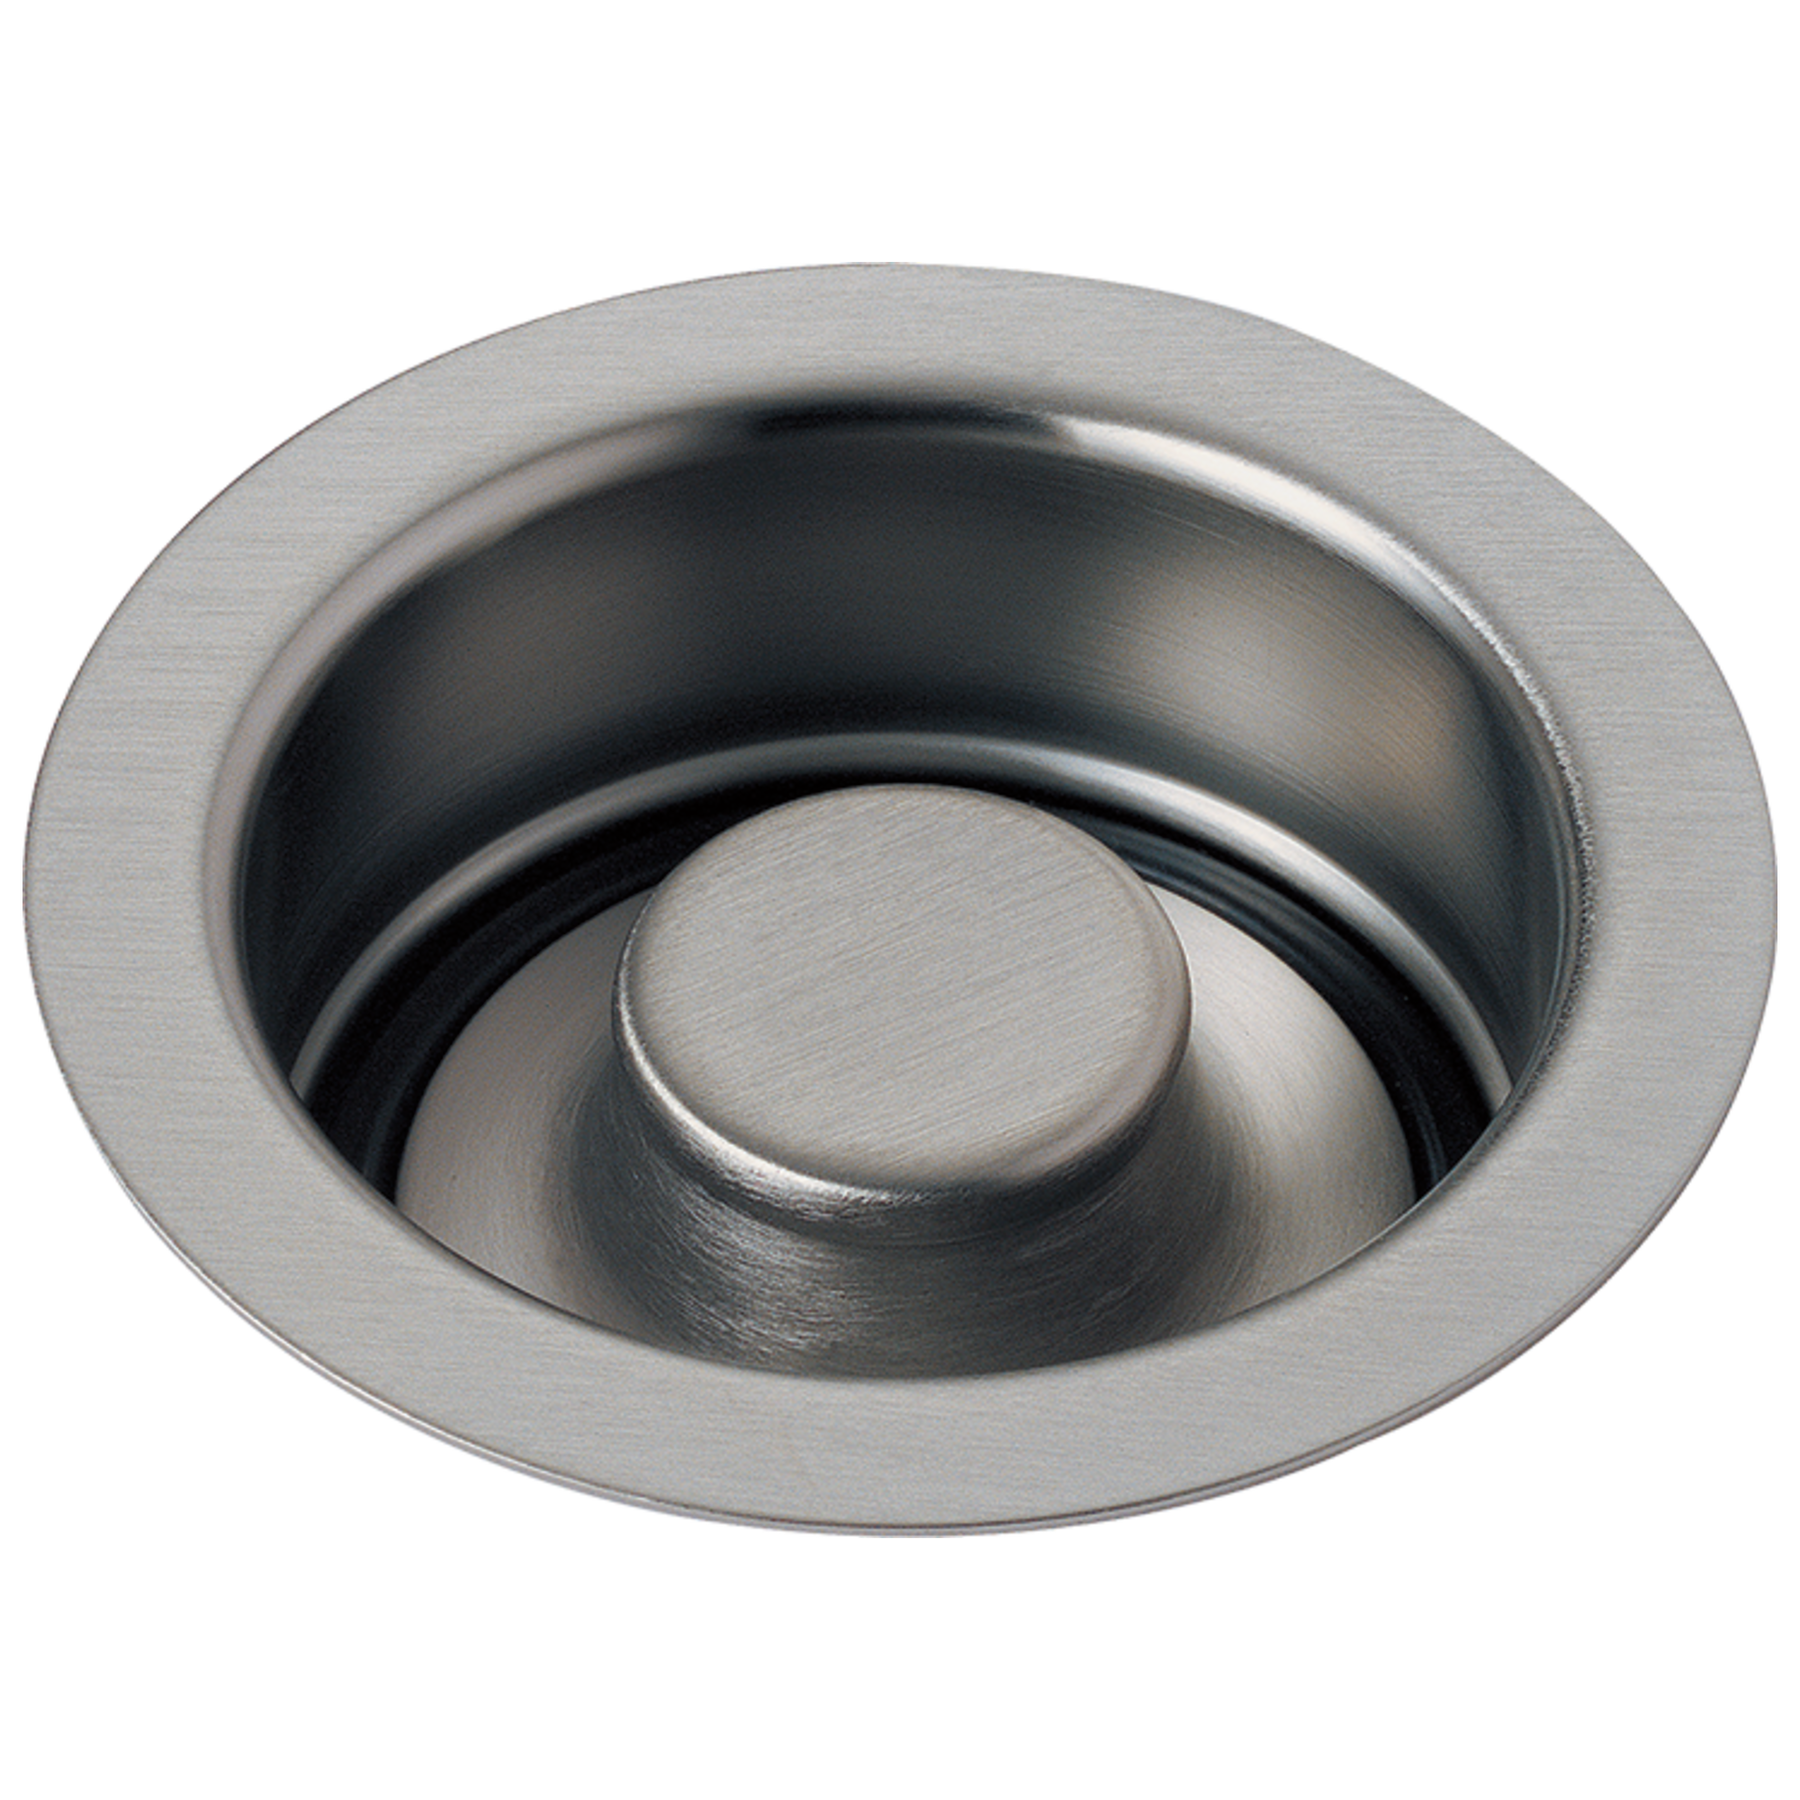 Sink Stopper, Brushed/Stainless Steel Kitchen Sink Garbage Disposal Drain Stopper, Fits